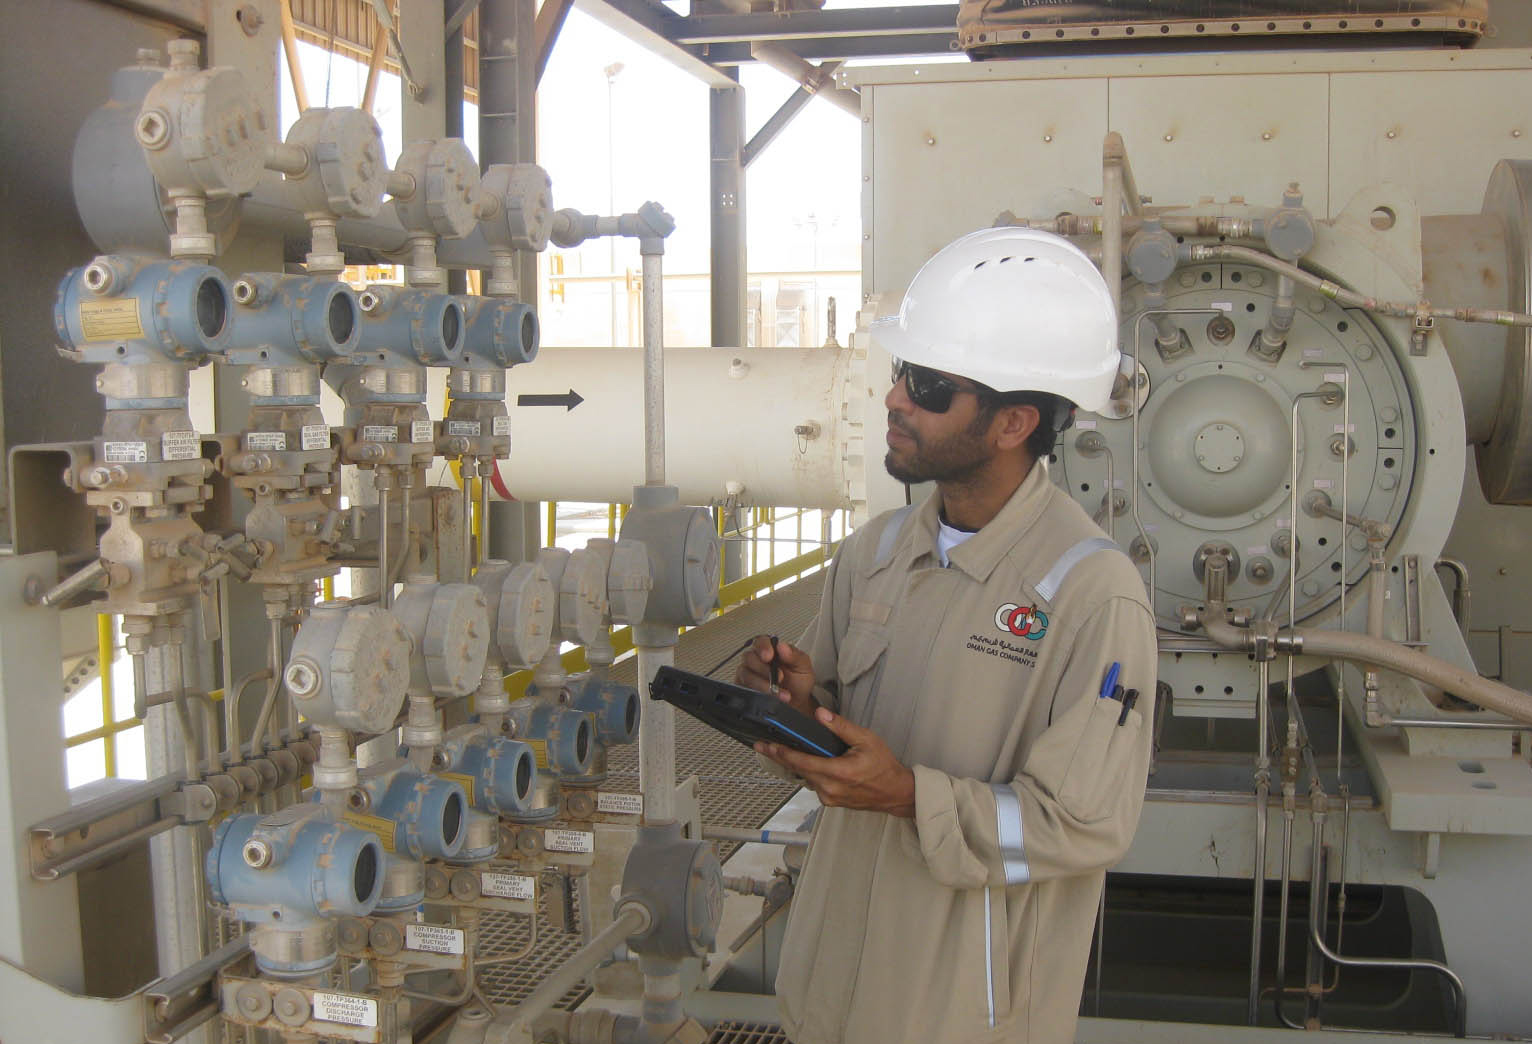 Oman Gas Company implements Bentley software solution